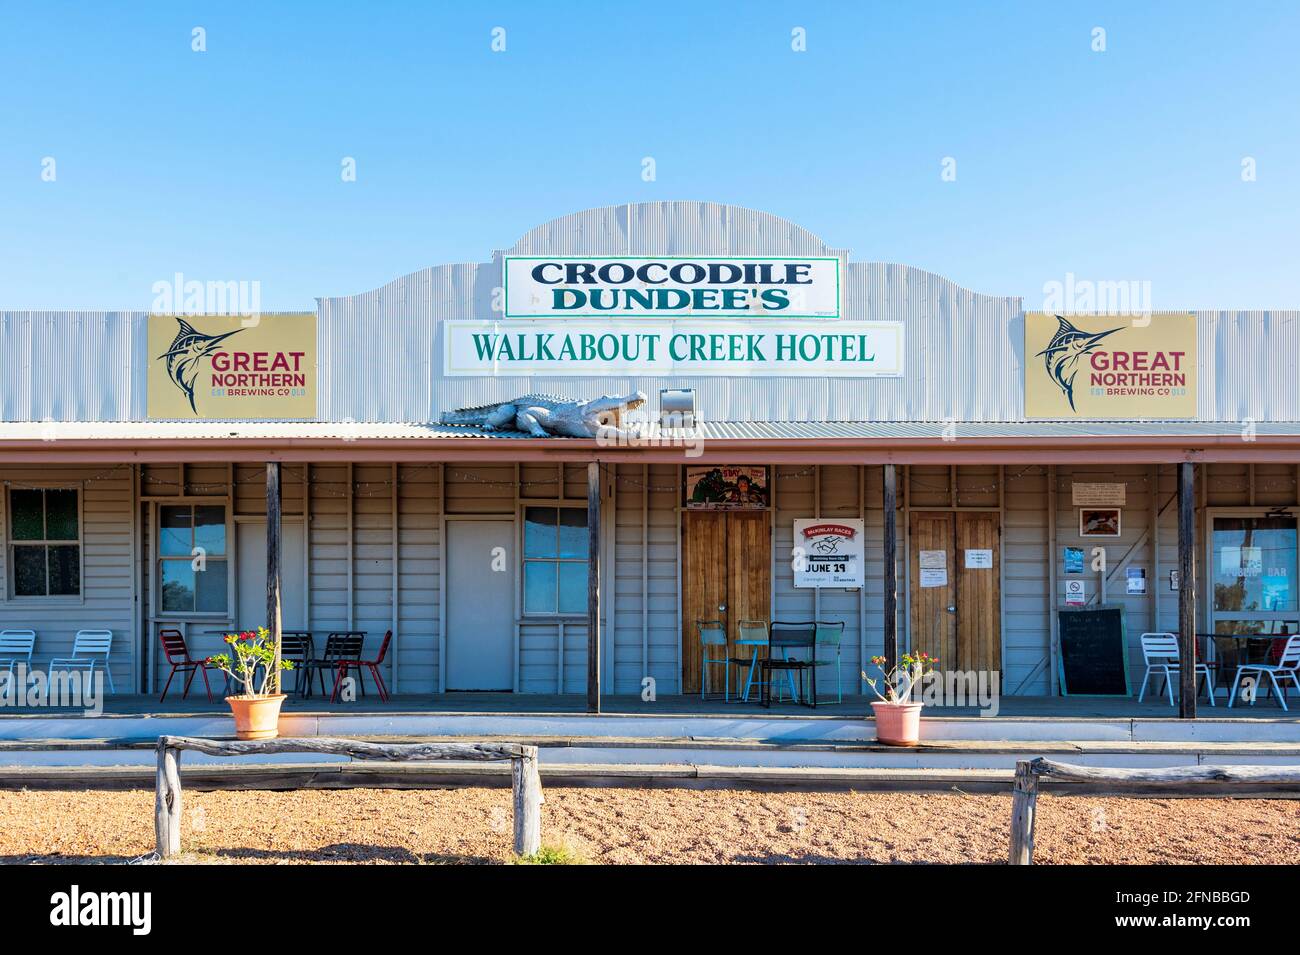 Exterior of the Walkabout Creek Hotel featured in the Crocodile Dundee's movie, McKinlay, Central Queensland, QLD, Australia. Stock Photo